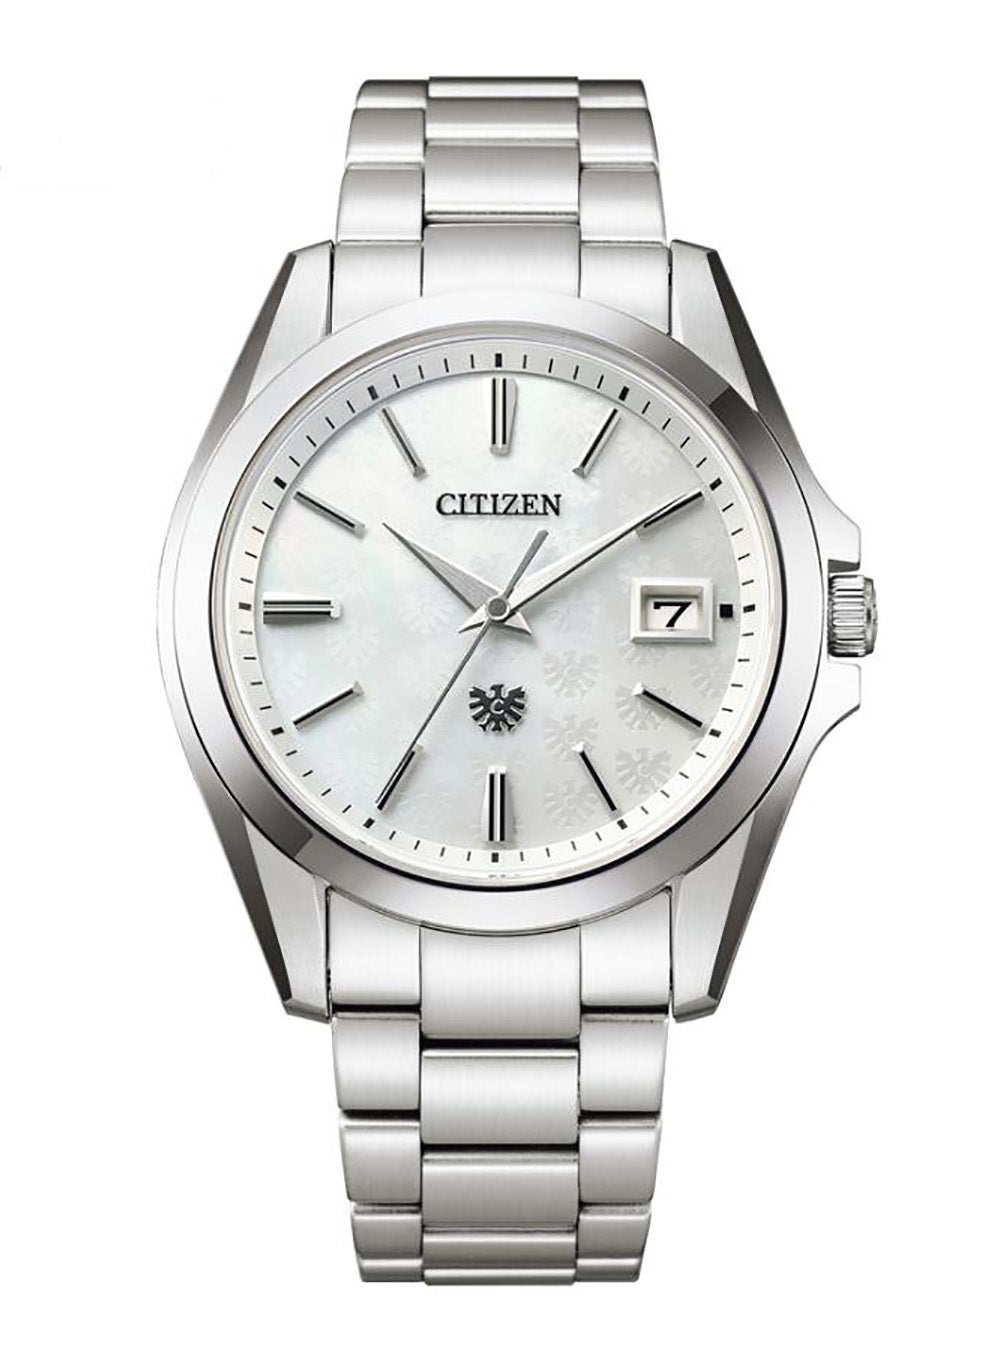 CITIZEN THE CITIZEN AQ4060-50W LIMITED EDITION MADE IN JAPAN JDMjapan-select4974375498556WRISTWATCHCITIZEN